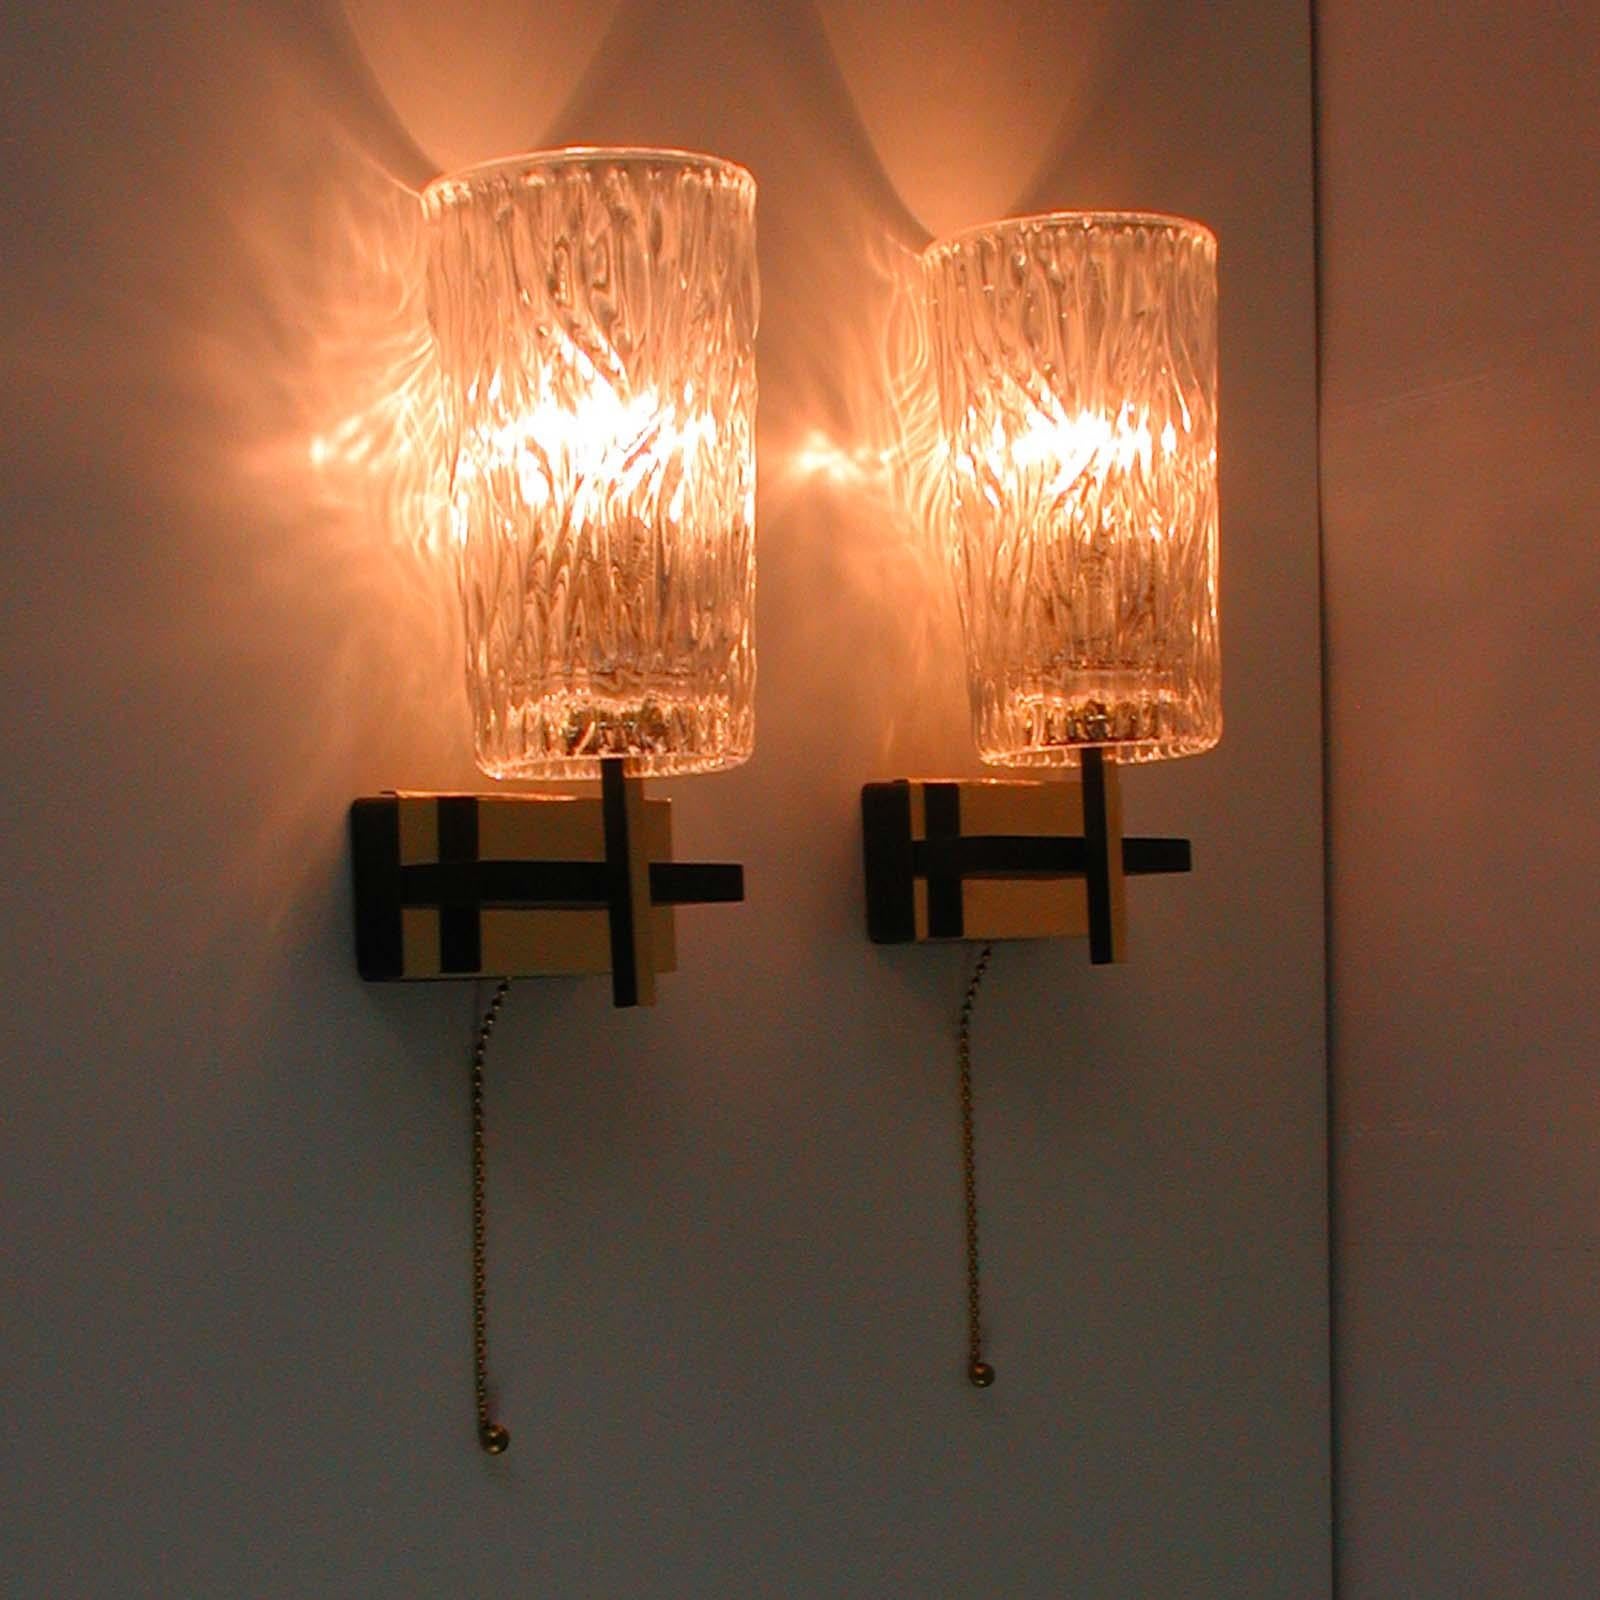 Midcentury French Brass and Textured Glass Sconces by Maison Arlus, 1950s For Sale 8